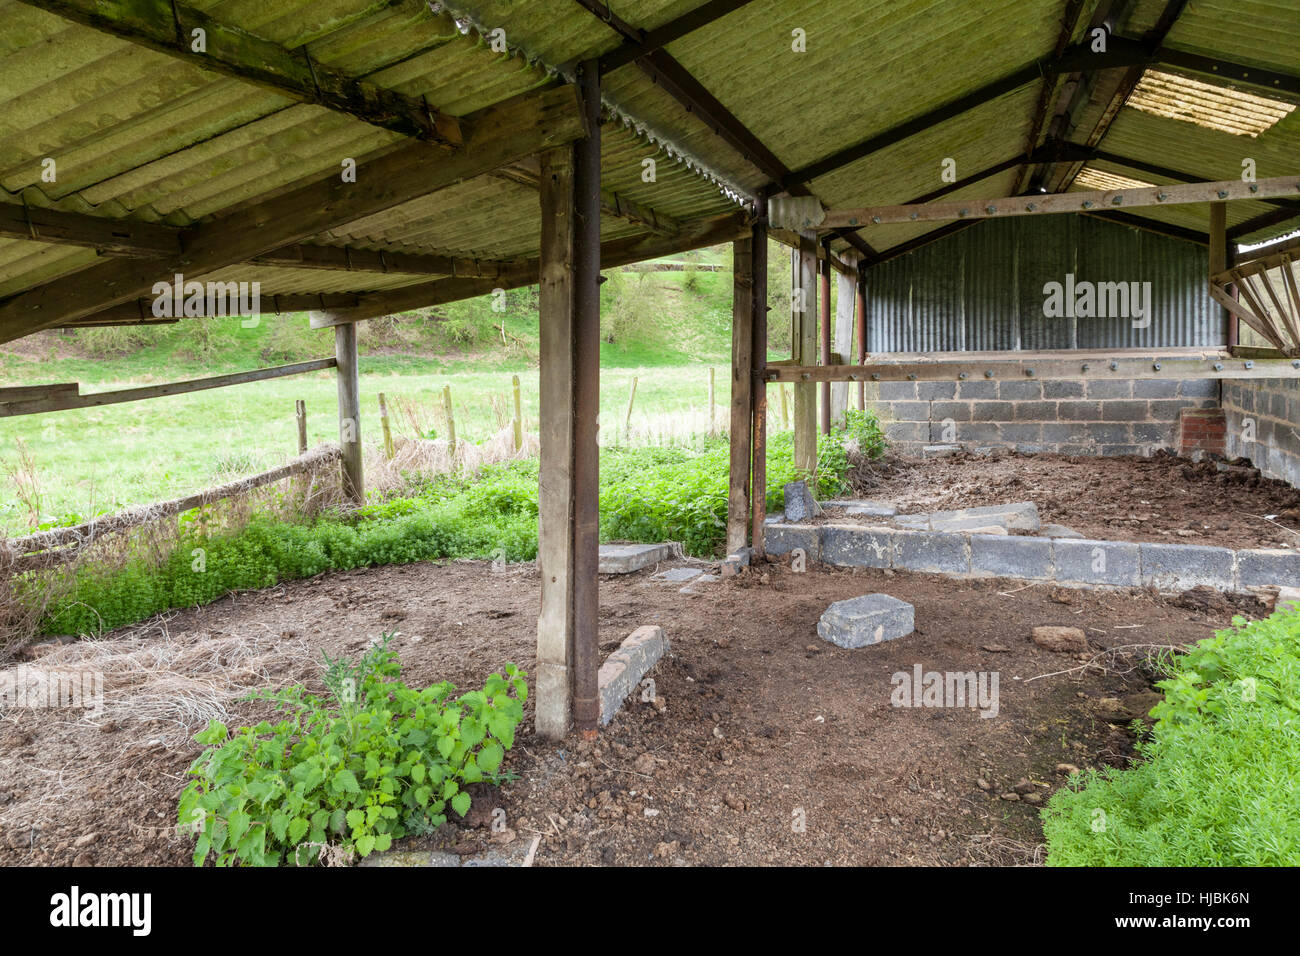 Abandoned farm shed with an asbestos roof, Derbyshire, England, UK Stock Photo